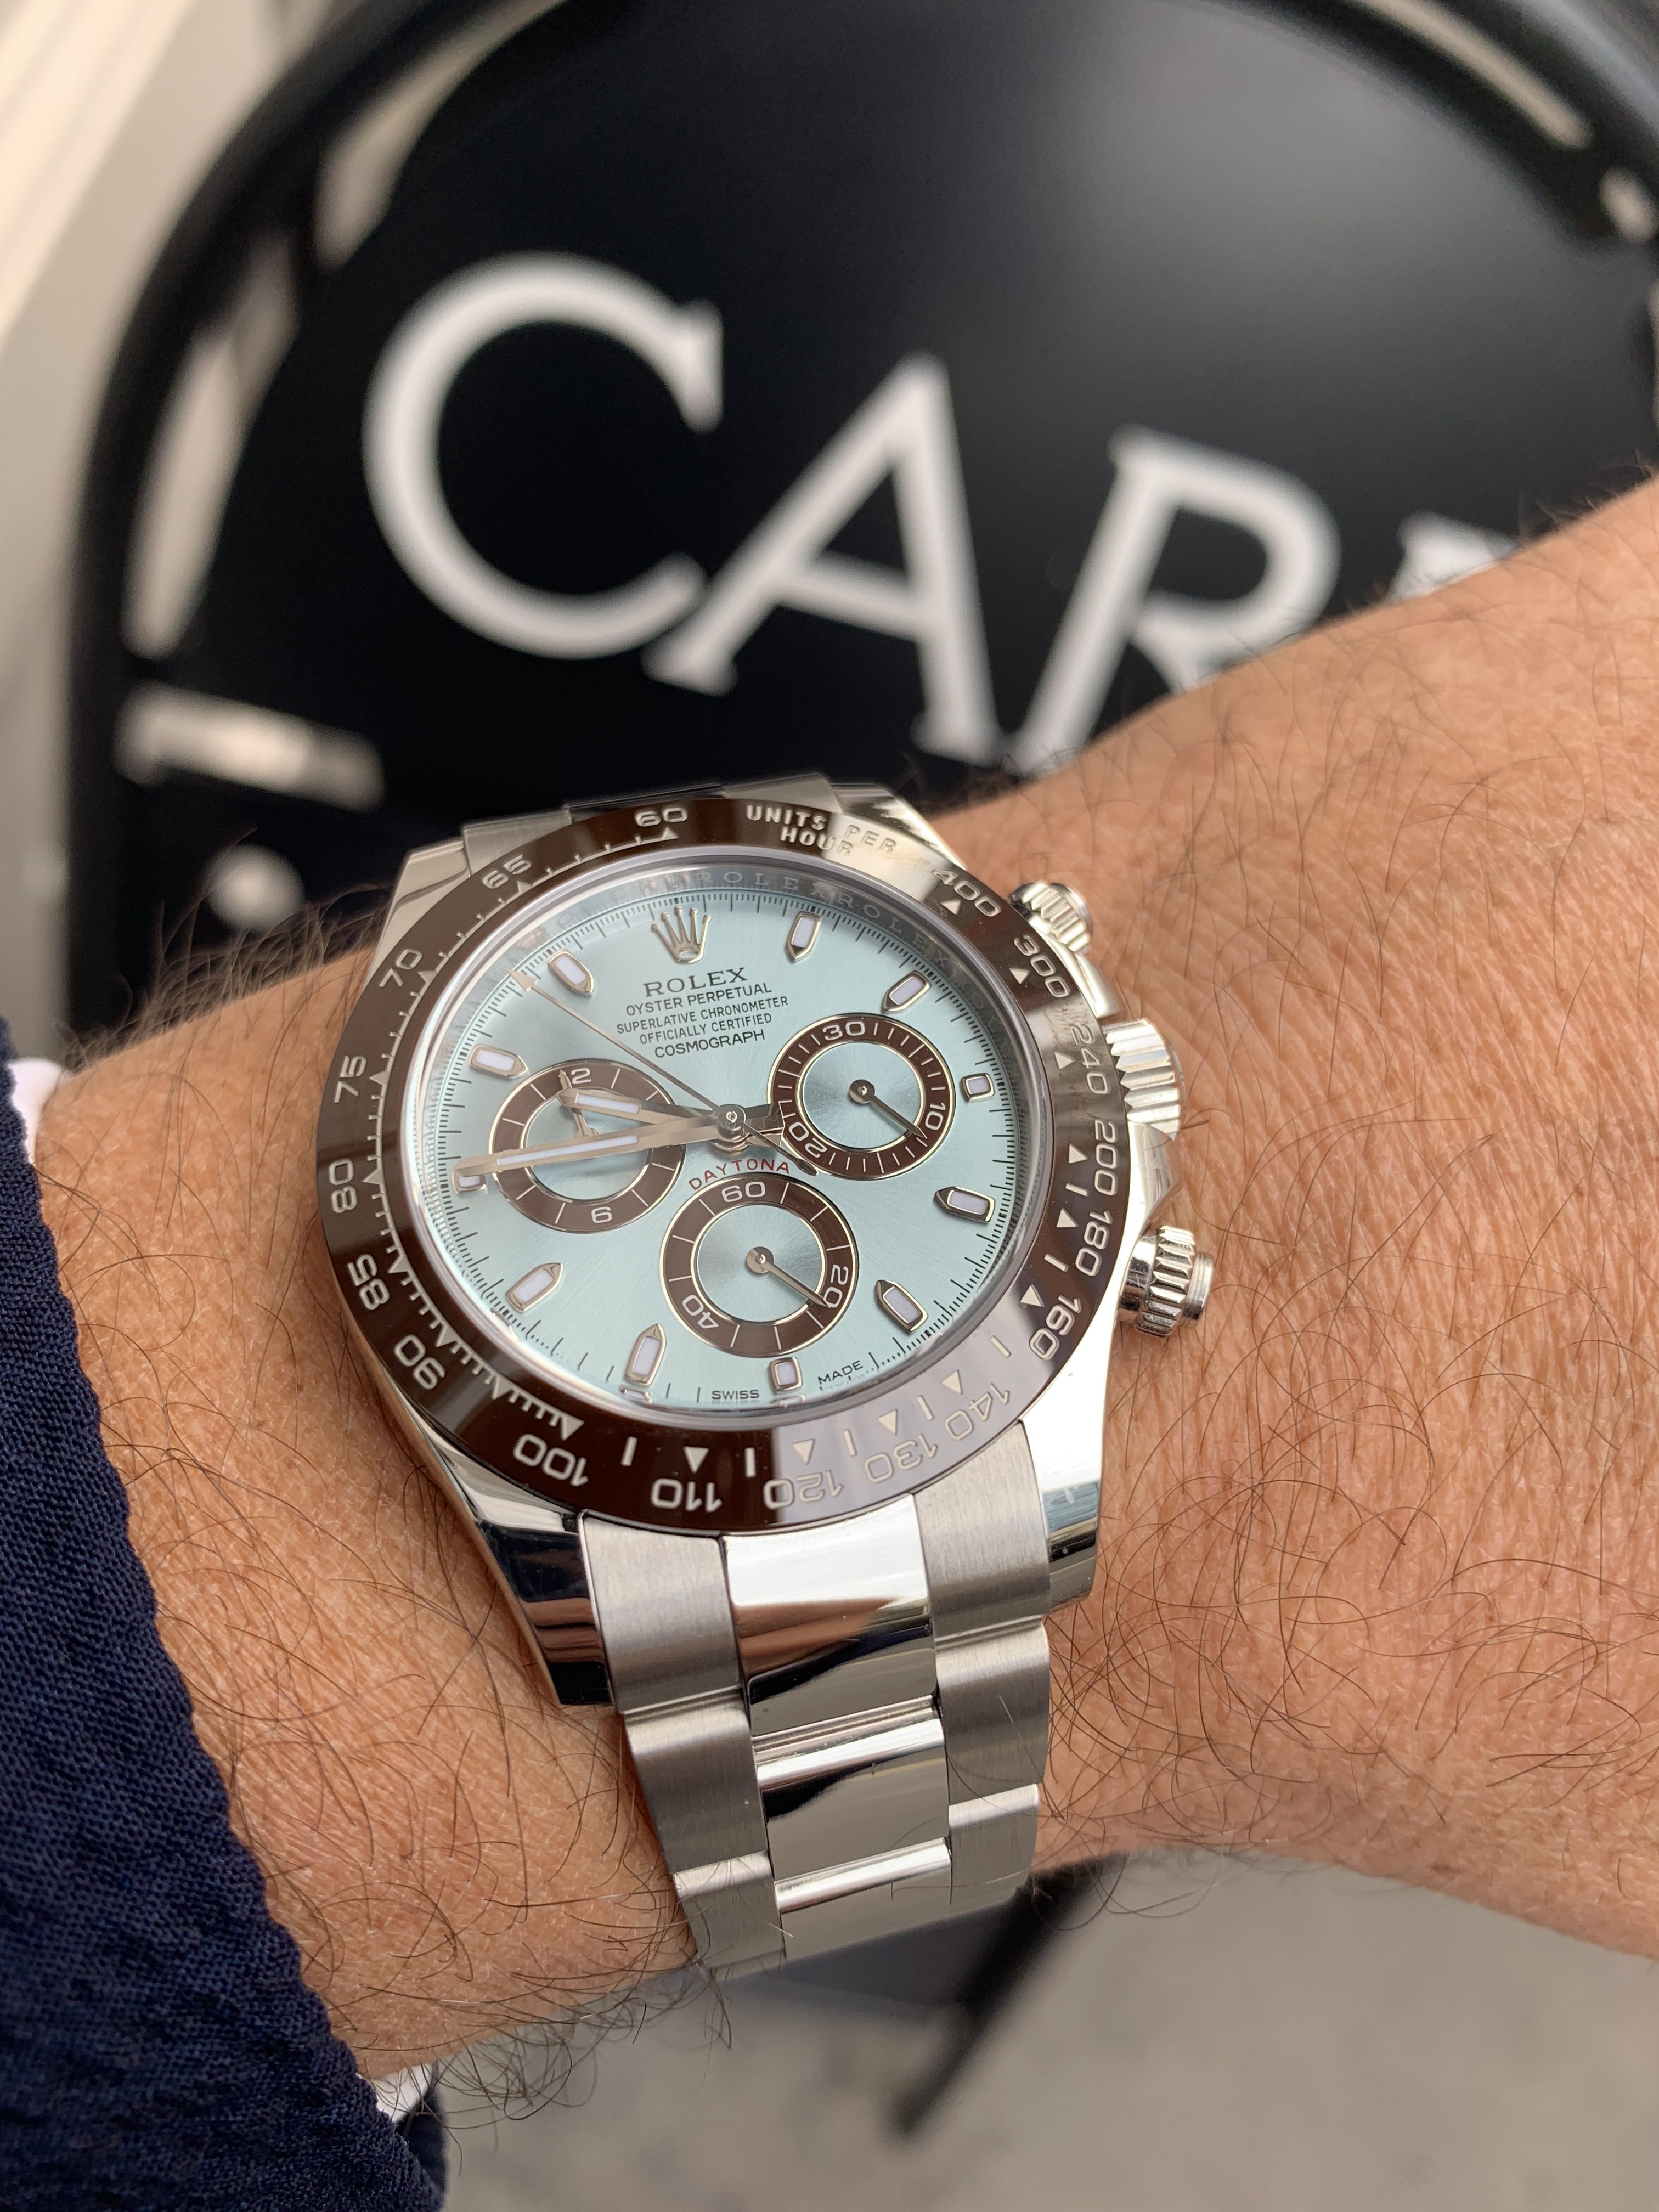 Rolex Daytona in Platinum with the stunning ice blue dial 116506 Carr Watches